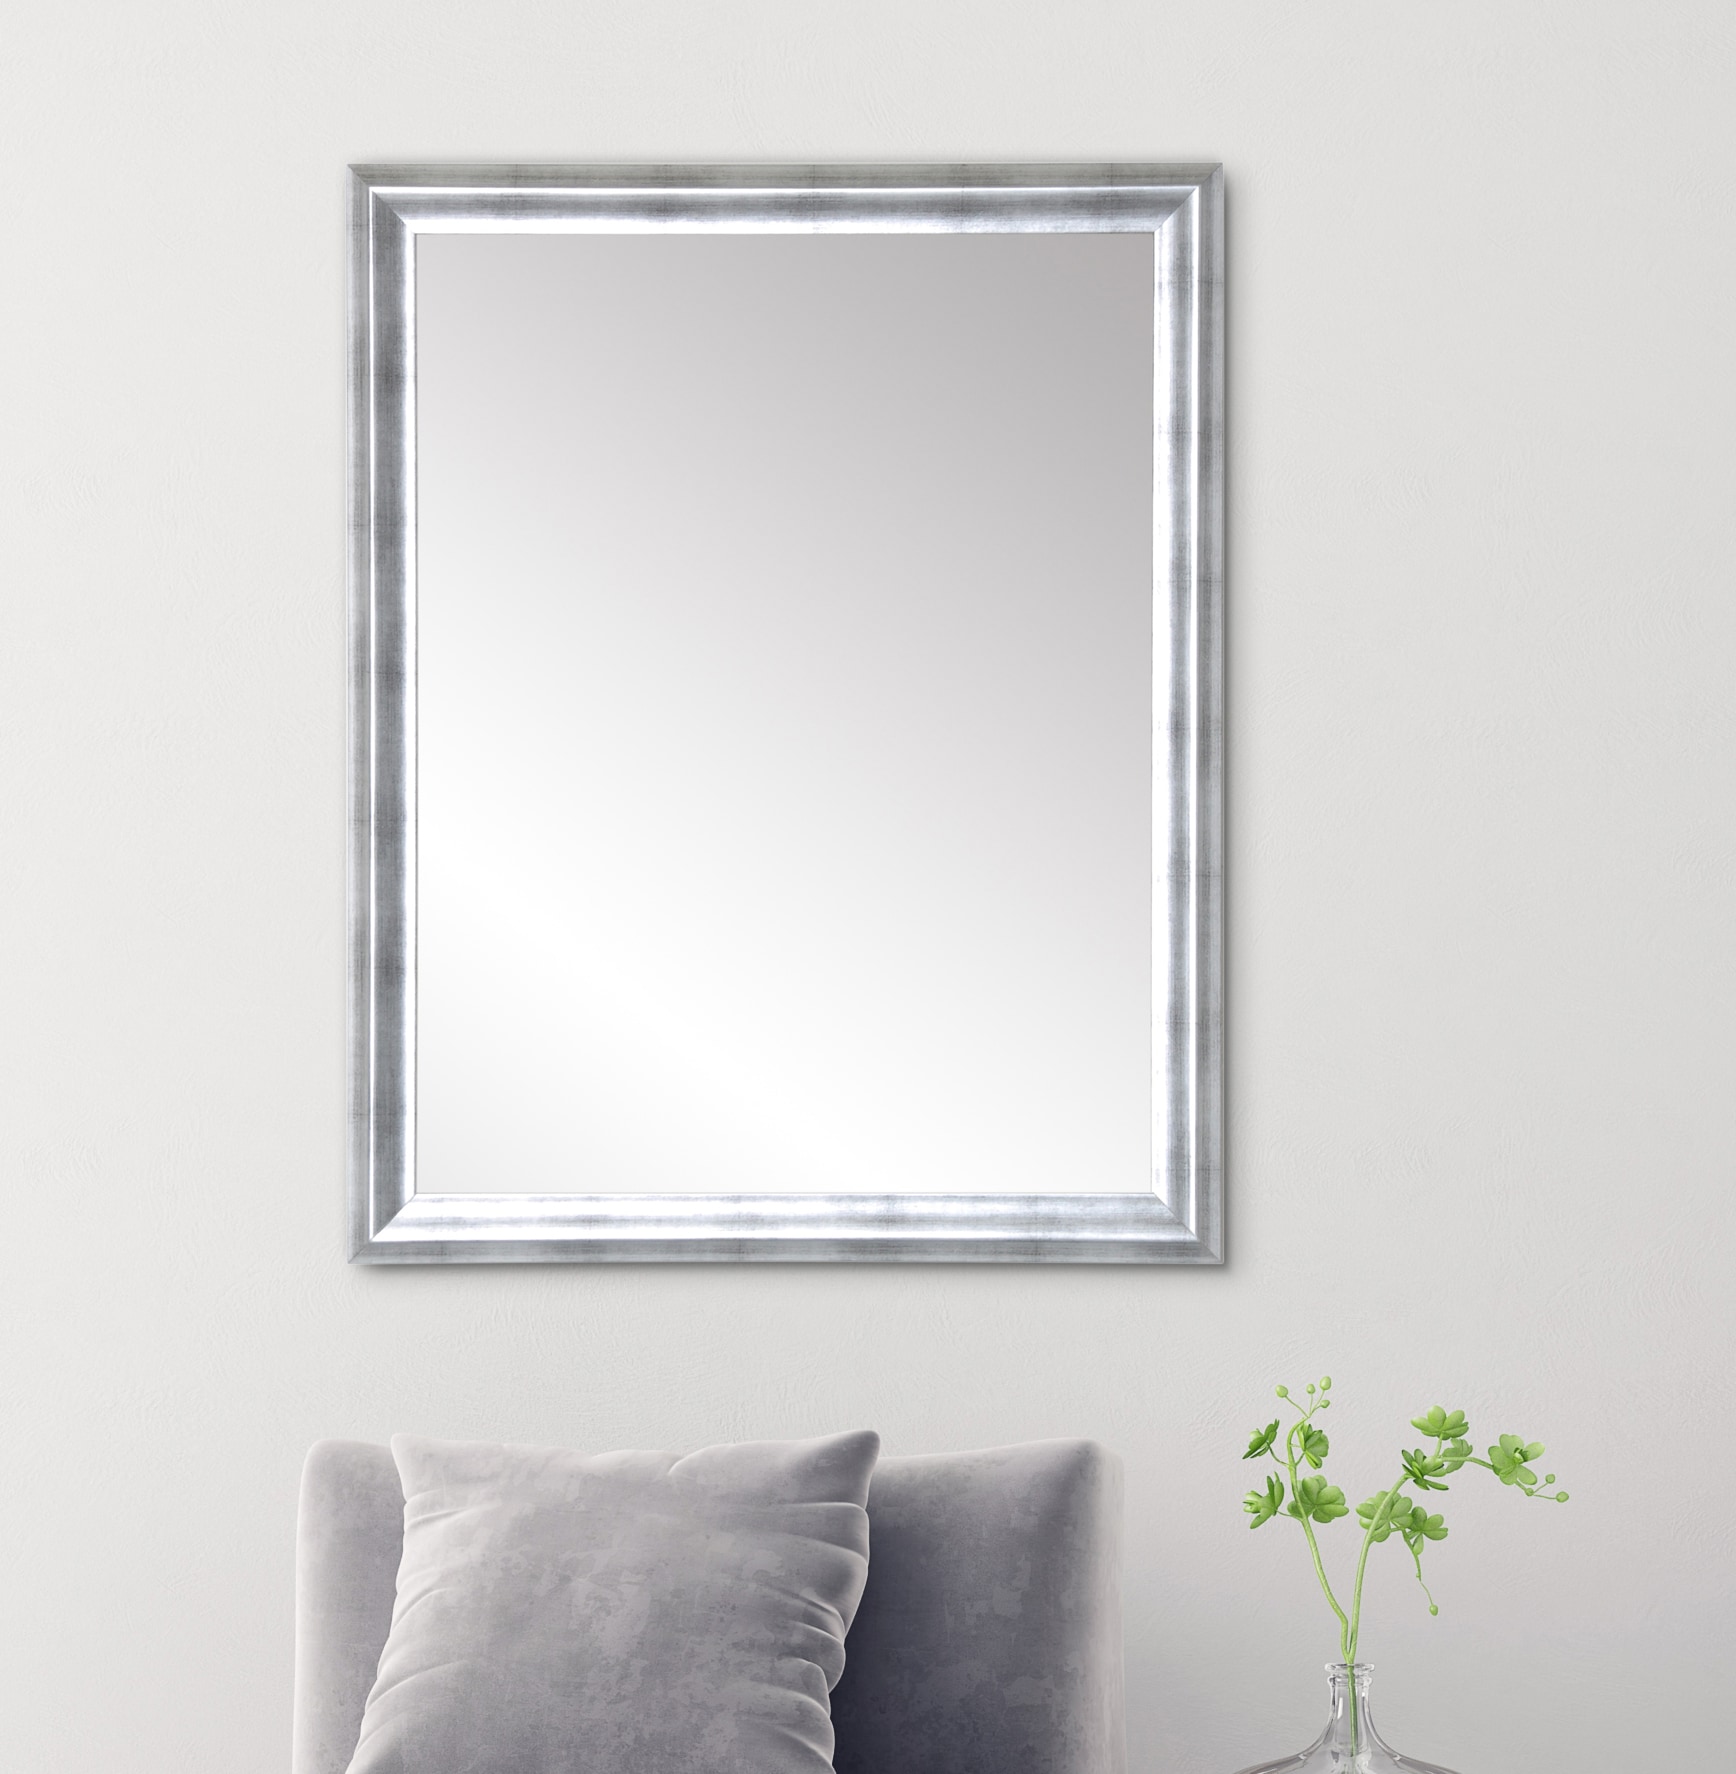 BrandtWorks 31-in W x 40-in H Silver/Antique Framed Wall Mirror in the ...